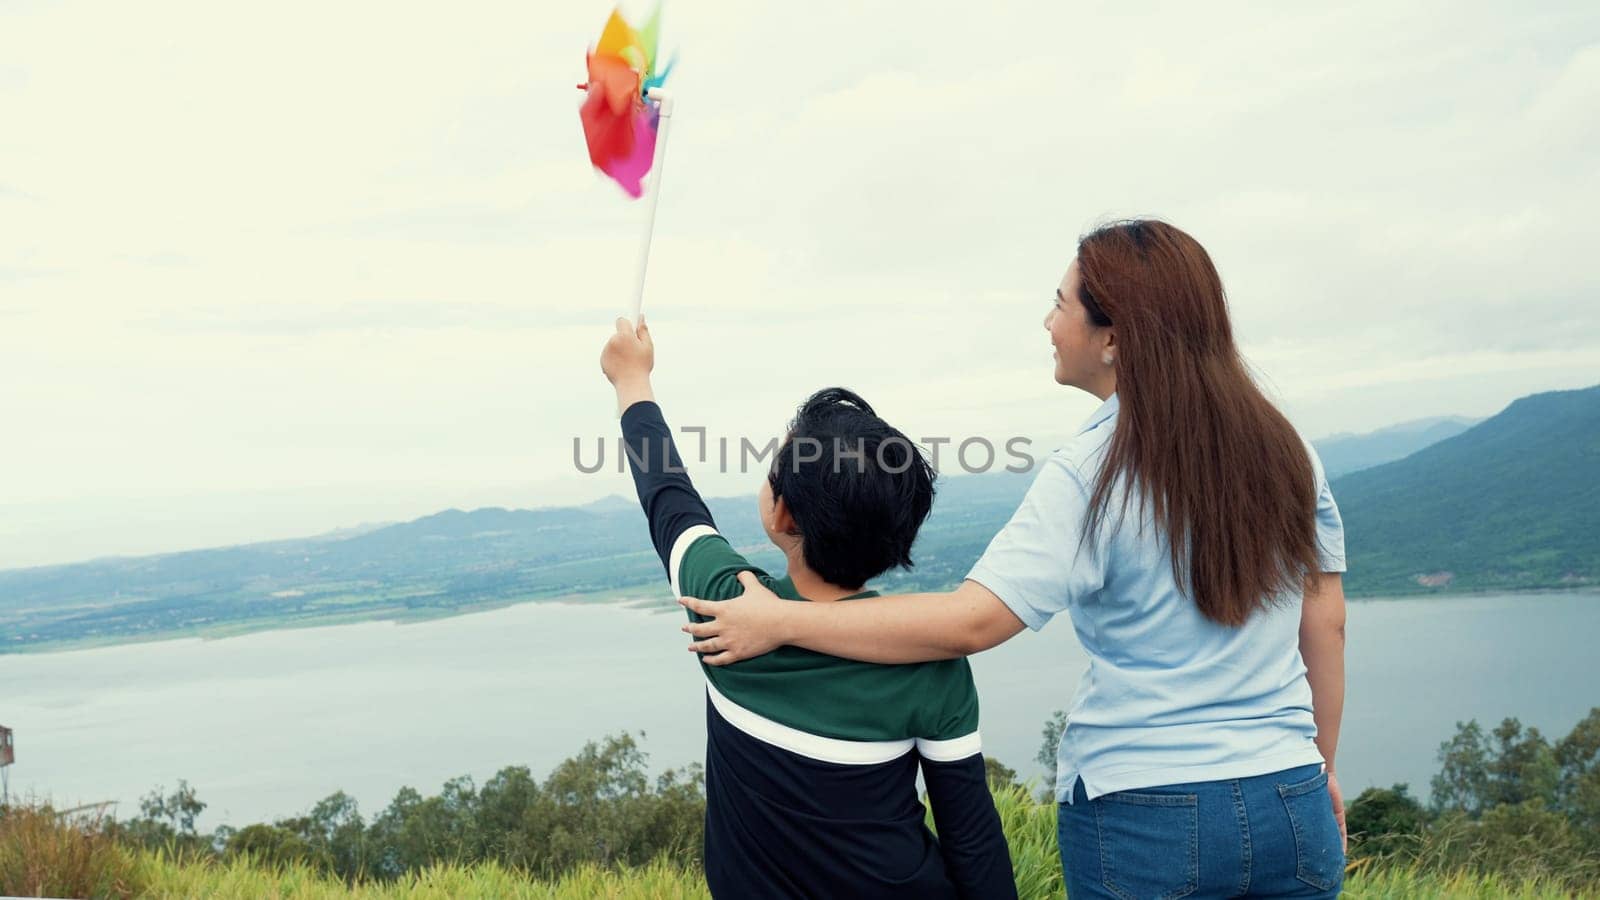 A progressive woman and her son are on vacation, enjoying the natural beauty of a lake at the bottom of a hill while the boy carries a toy windmill.